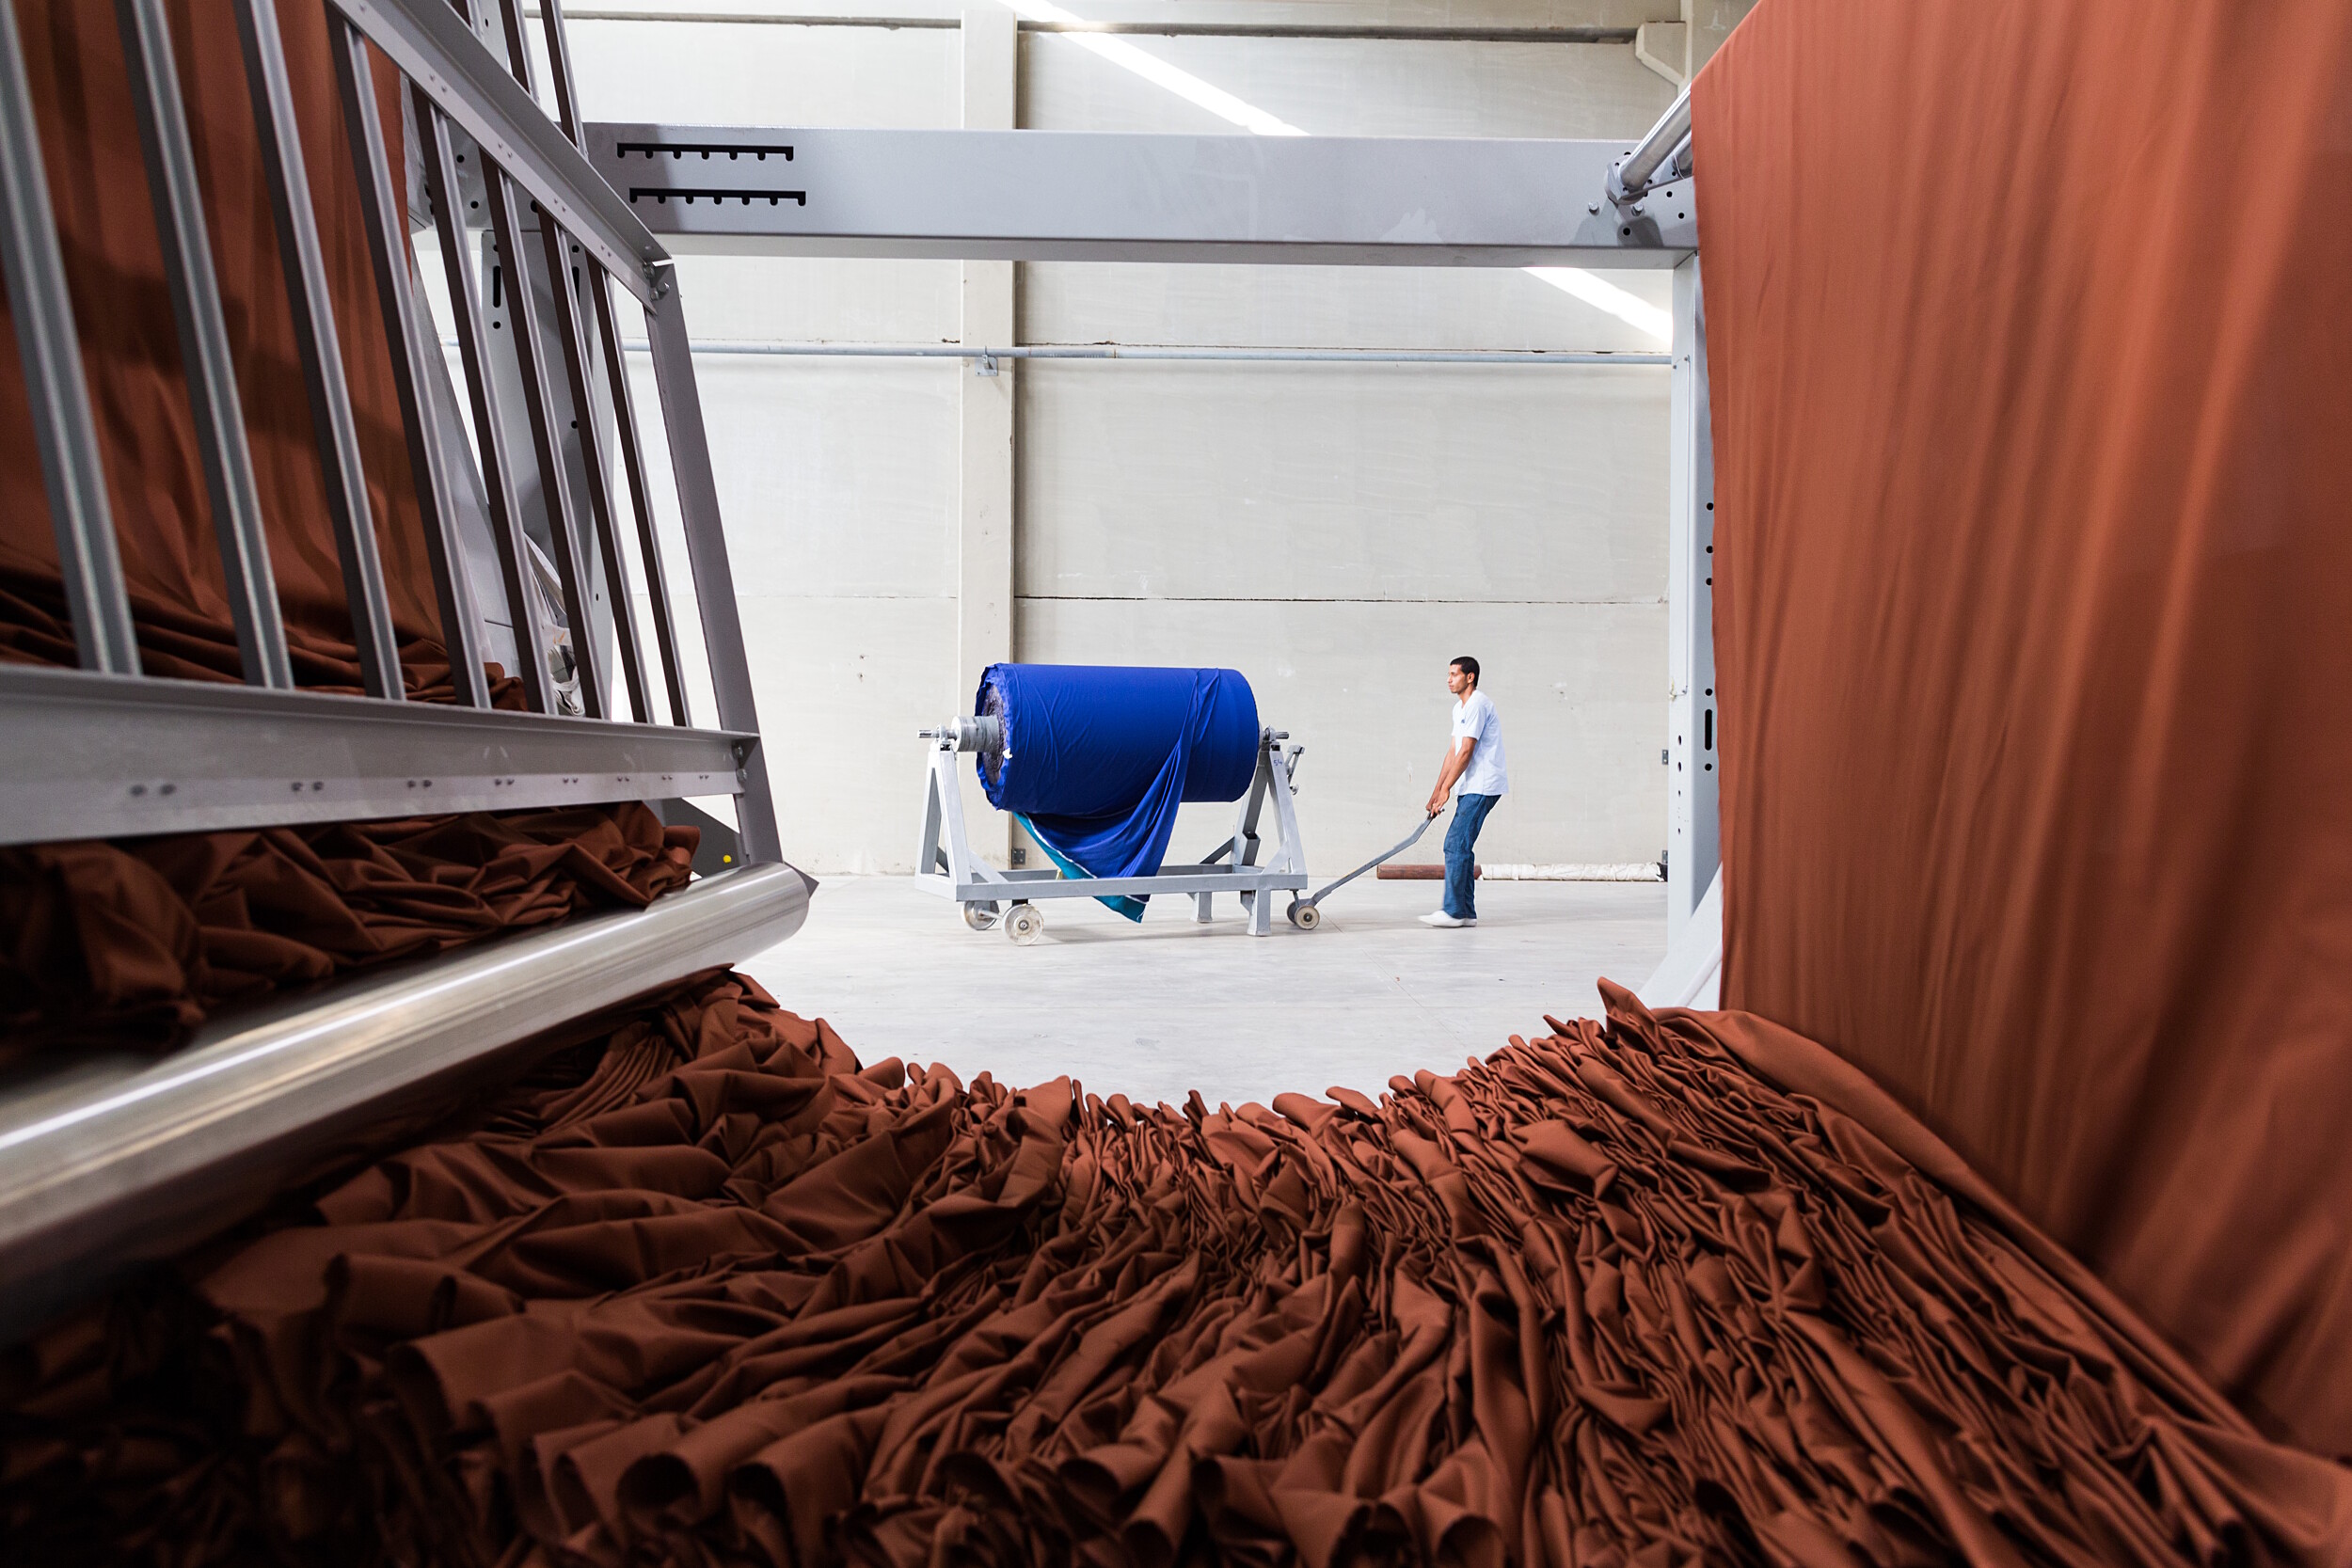 Photograph of a textile factory by the manufacturing photographer, David Degner.